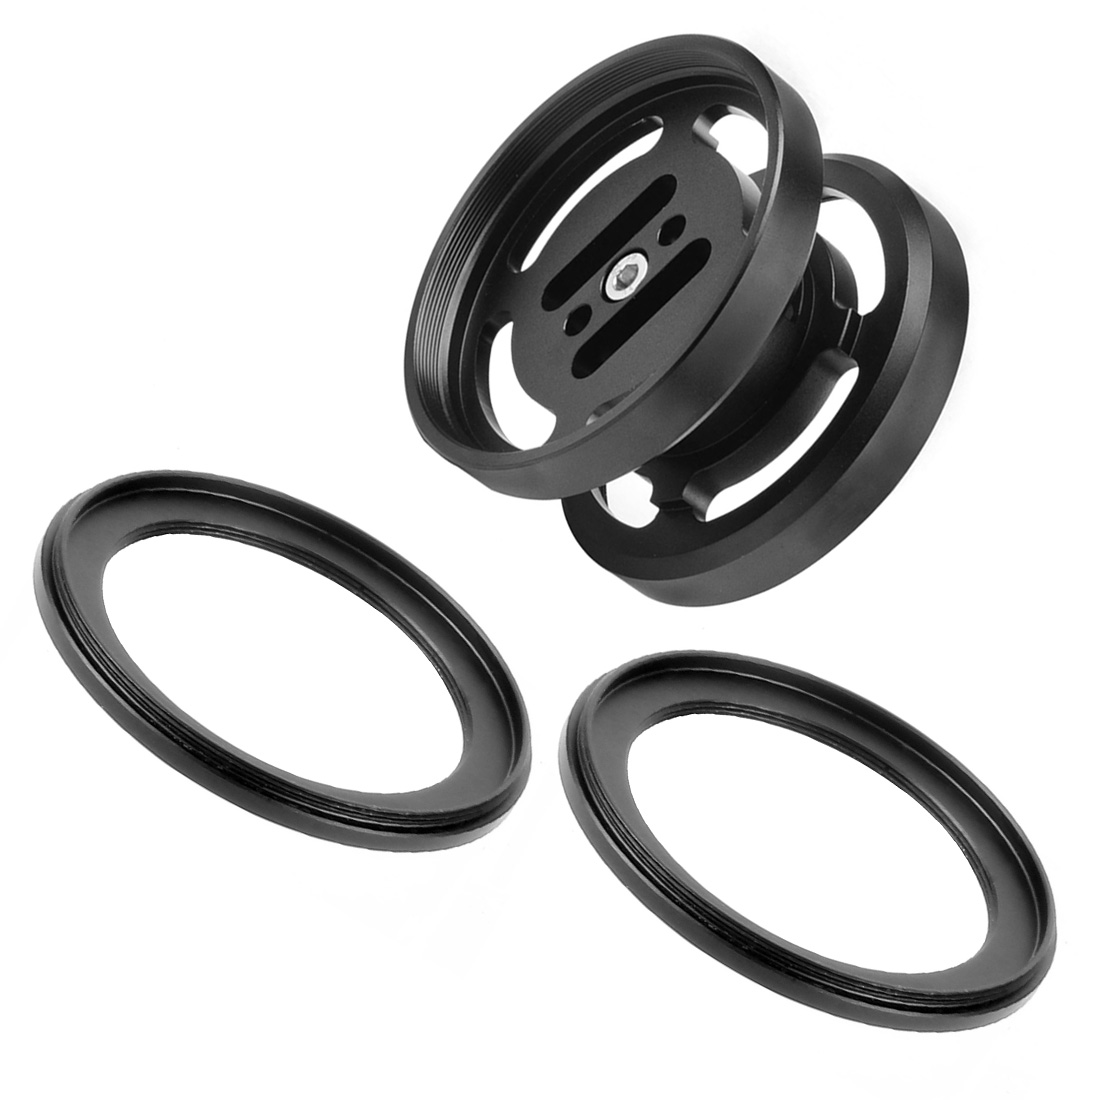 BGNing M67 Lens Holder Double Mount with 2pcs M67 to M52 Conversion Ring for Float Arm Underwater Floating Light Arm 67mm Macro Lens Carrier Carrying Mount Adapter for Diving Photography